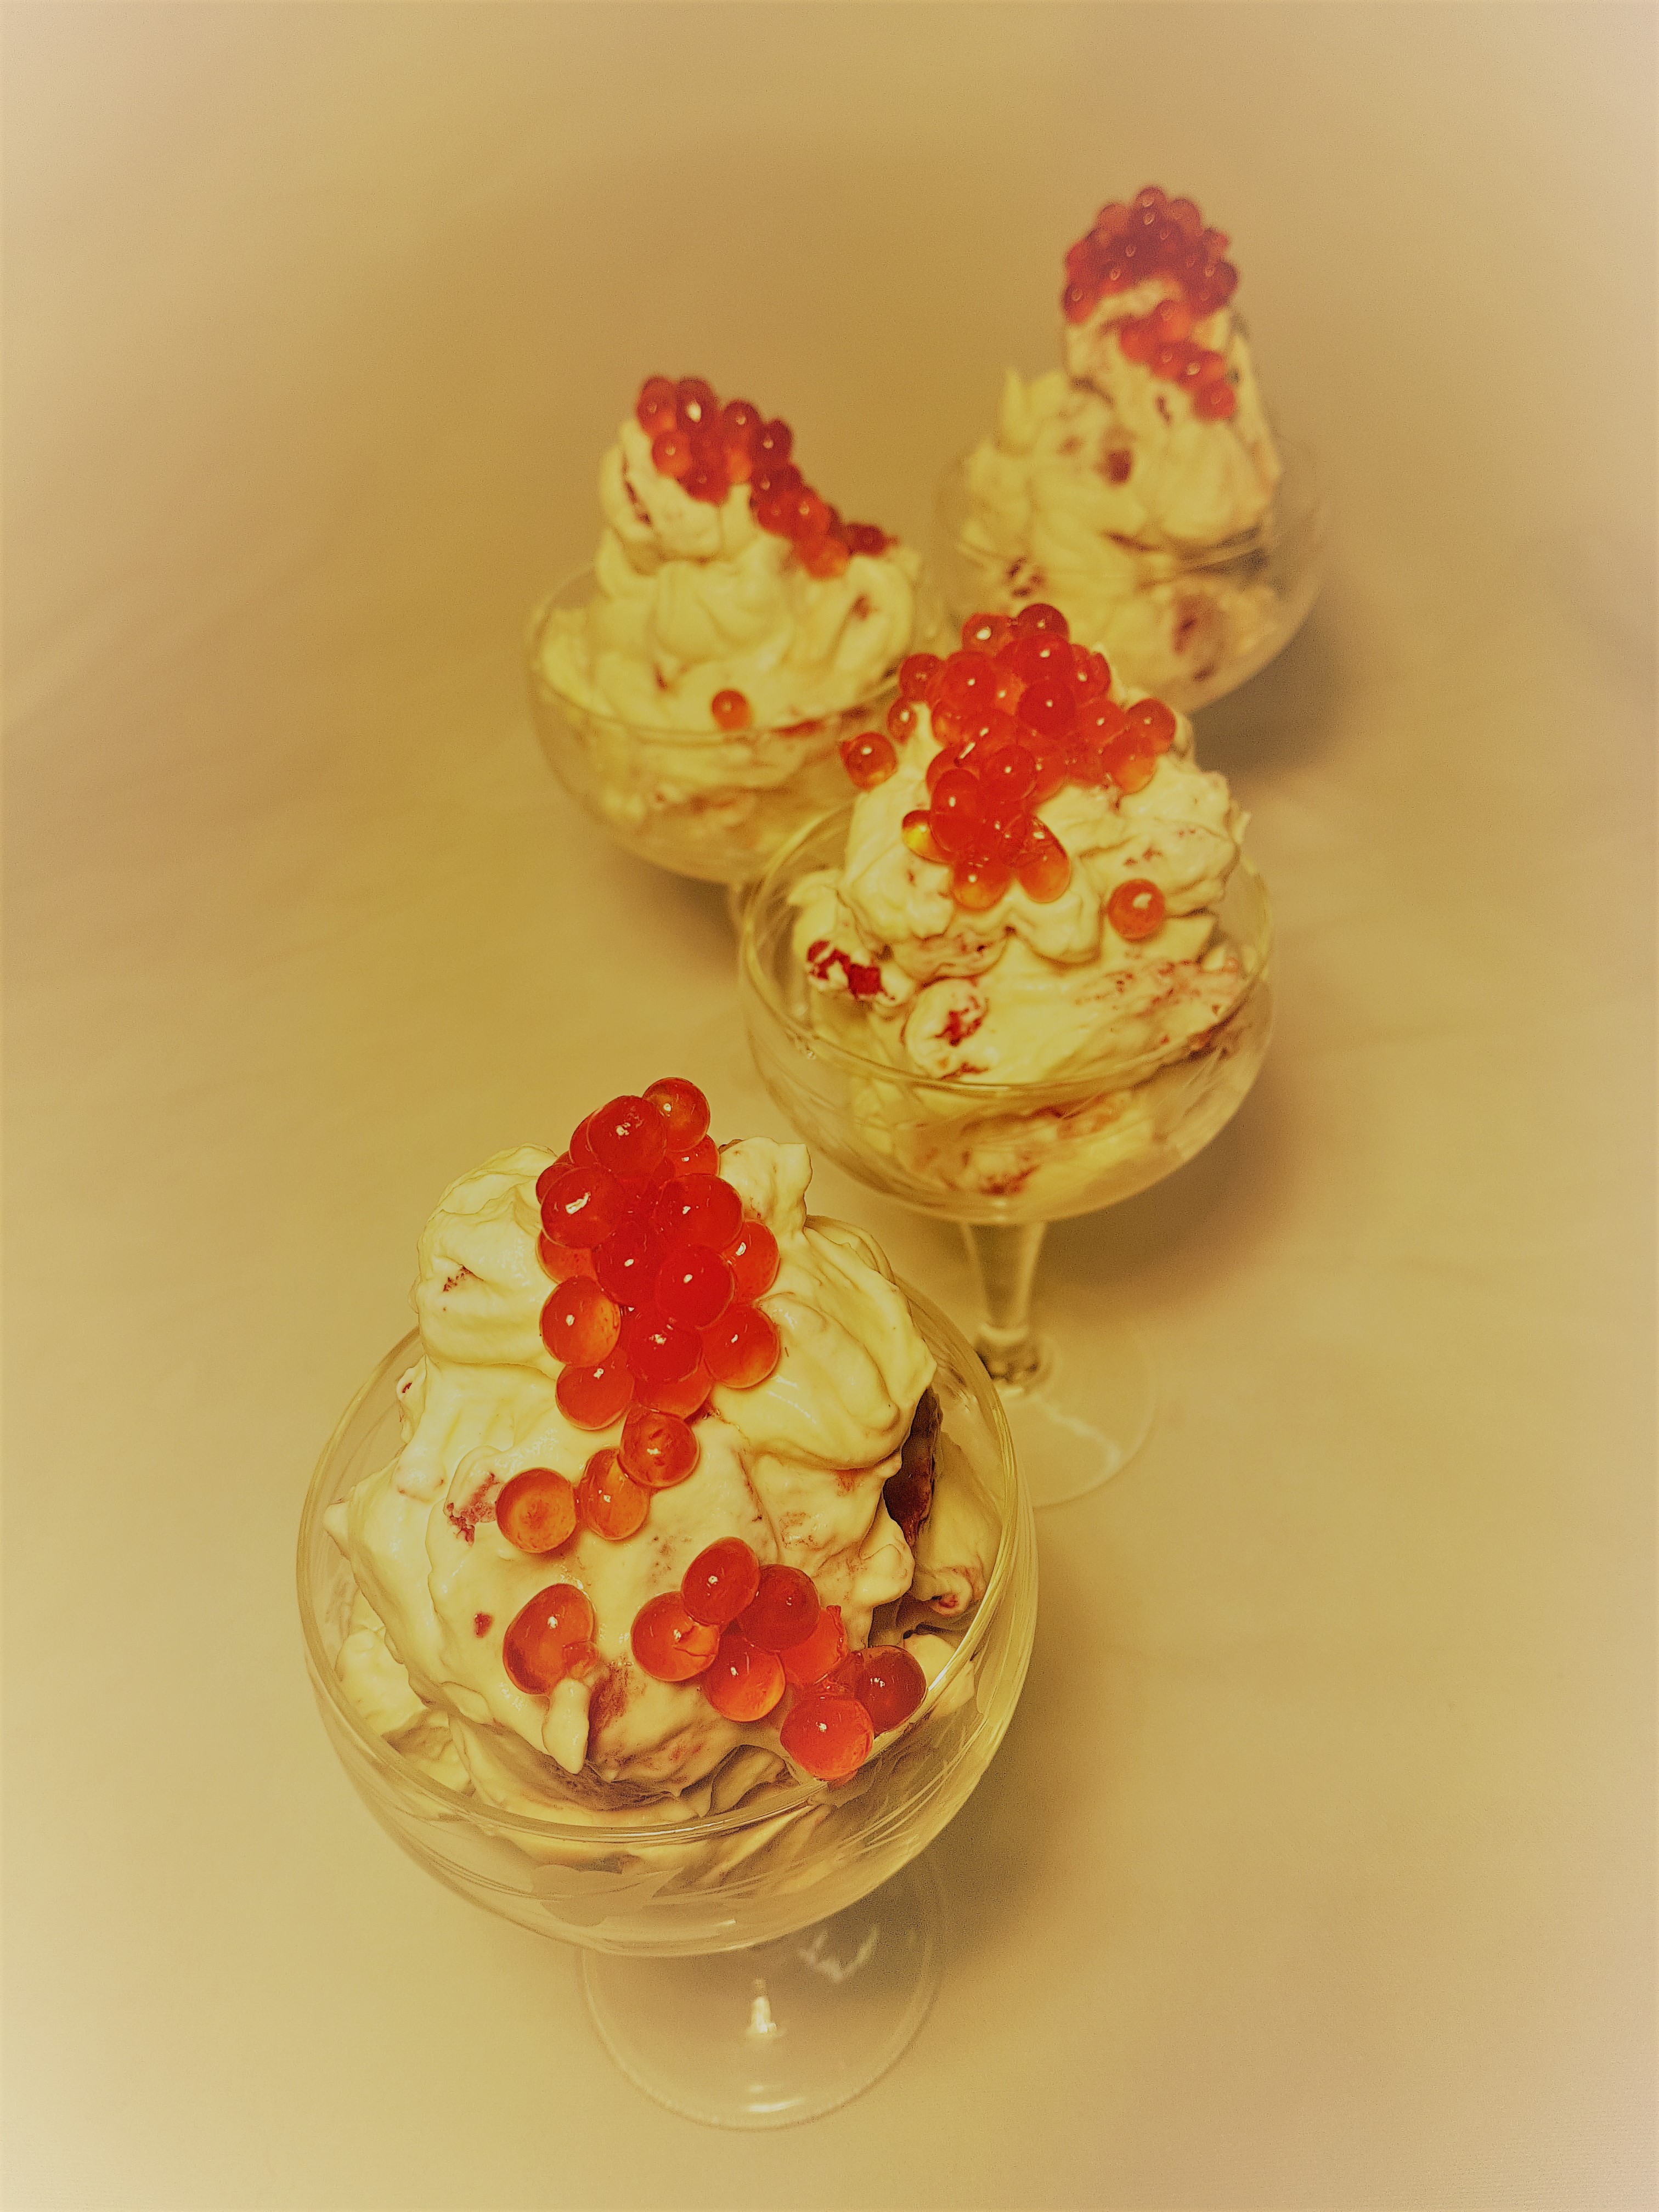 Peninsula Larders Strawberry Flavour Pearls add a delicious bursting garnish for your Eton Mess